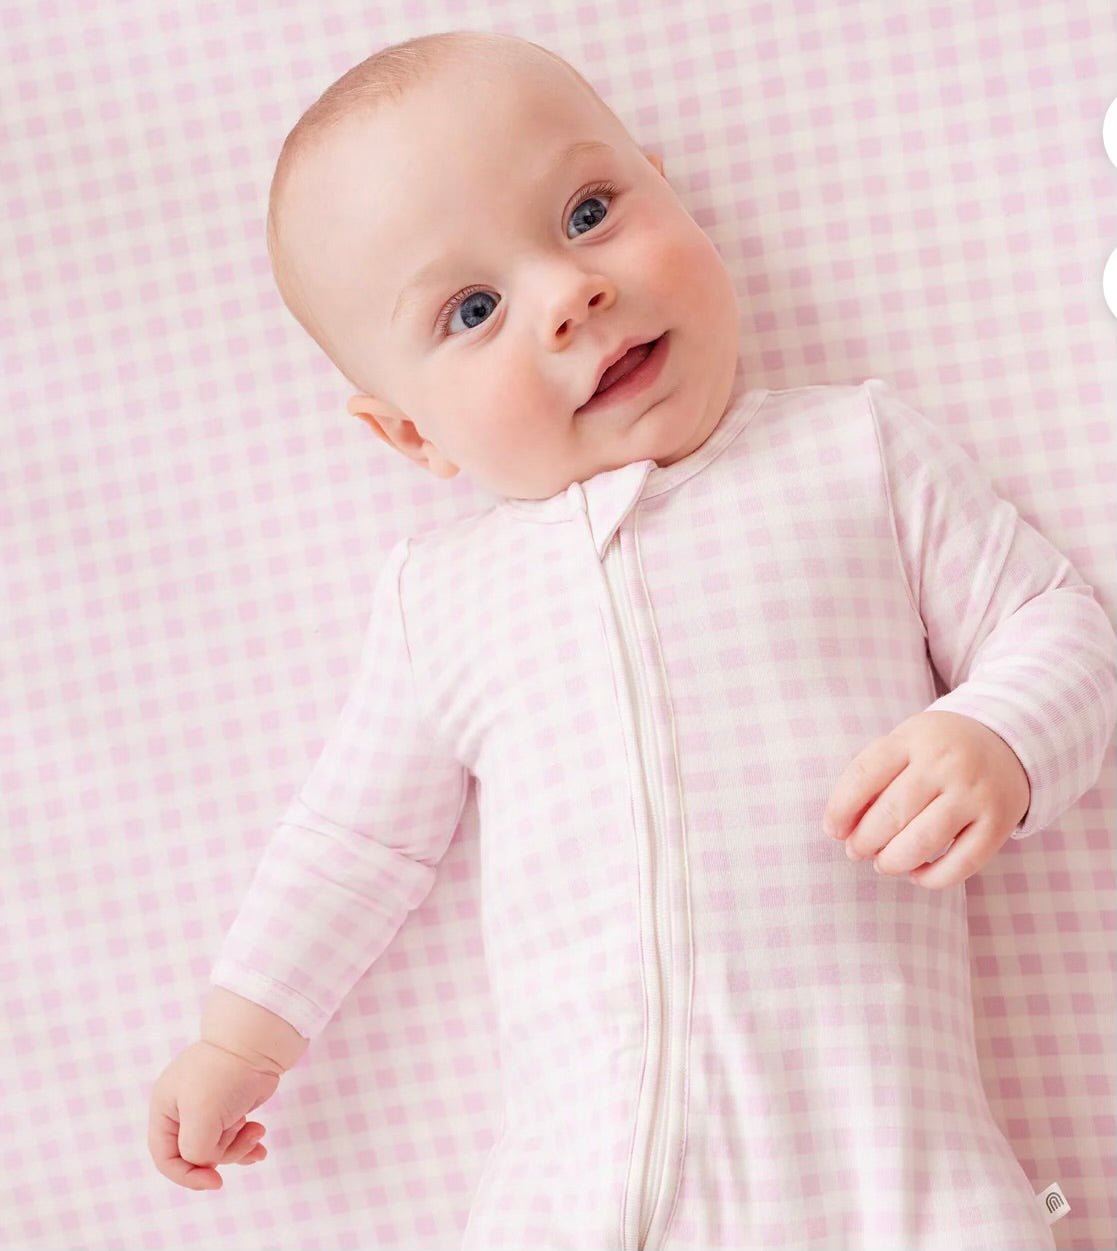 Day or Night Onesie - Orchid Gingham